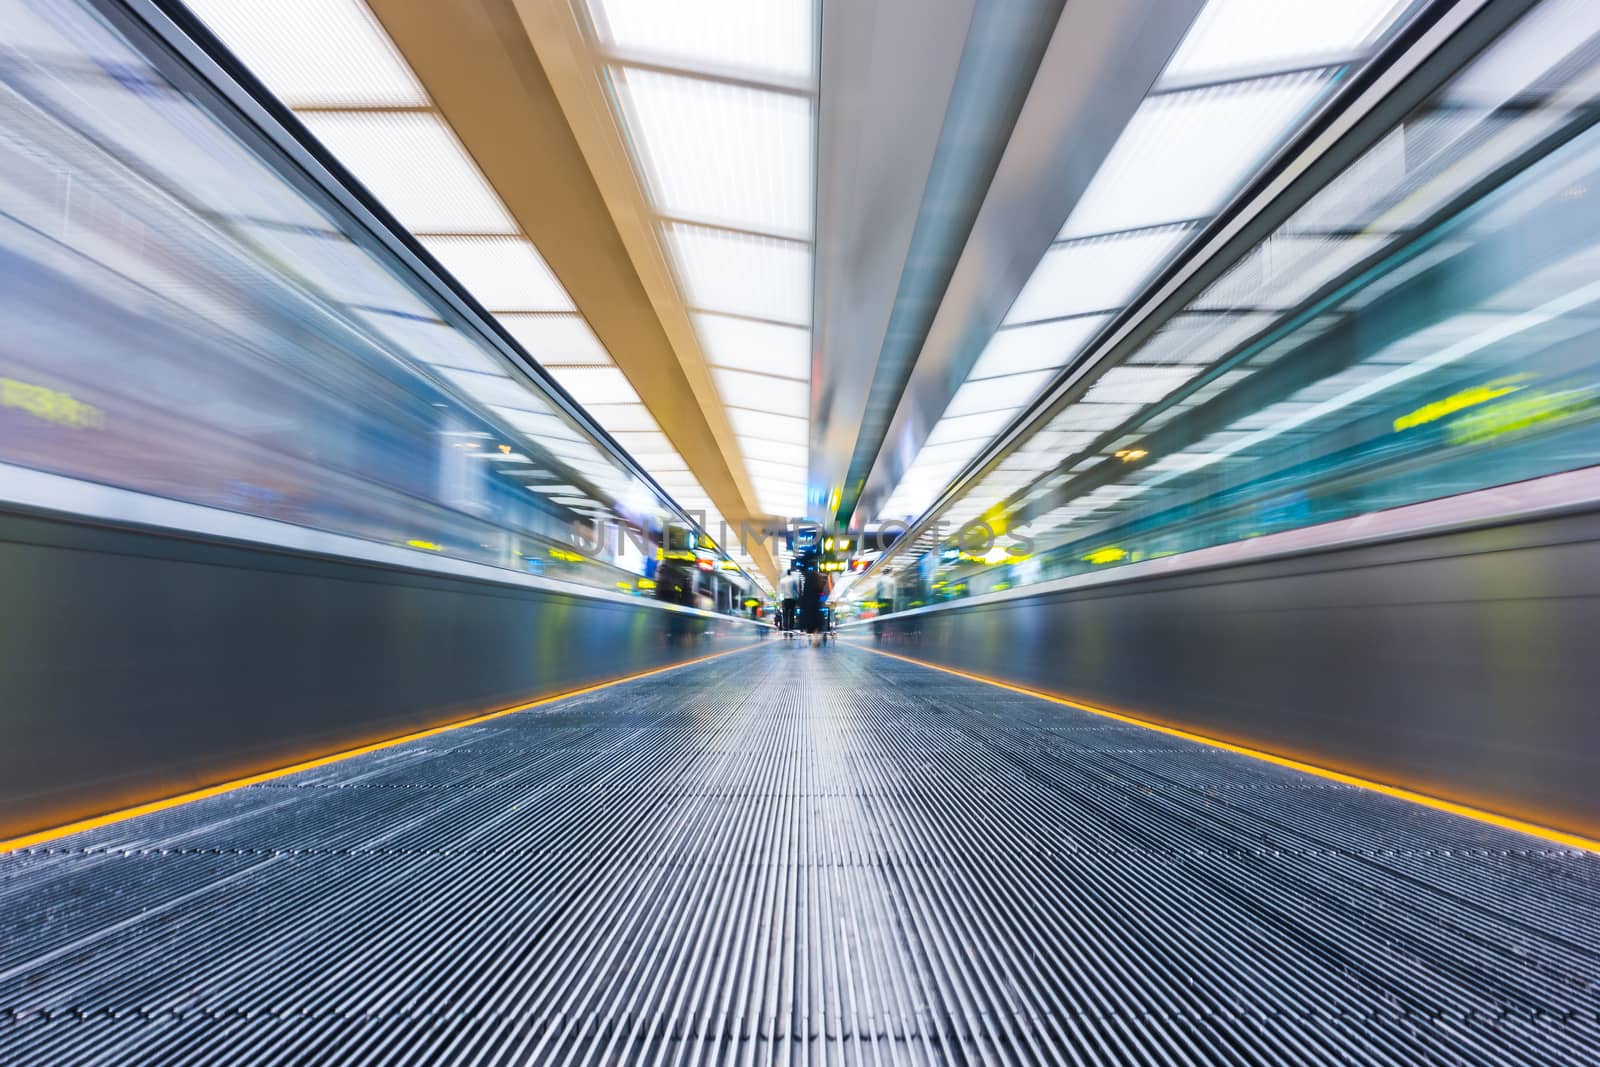 Moving walkway or travelator with motion blur at international airport